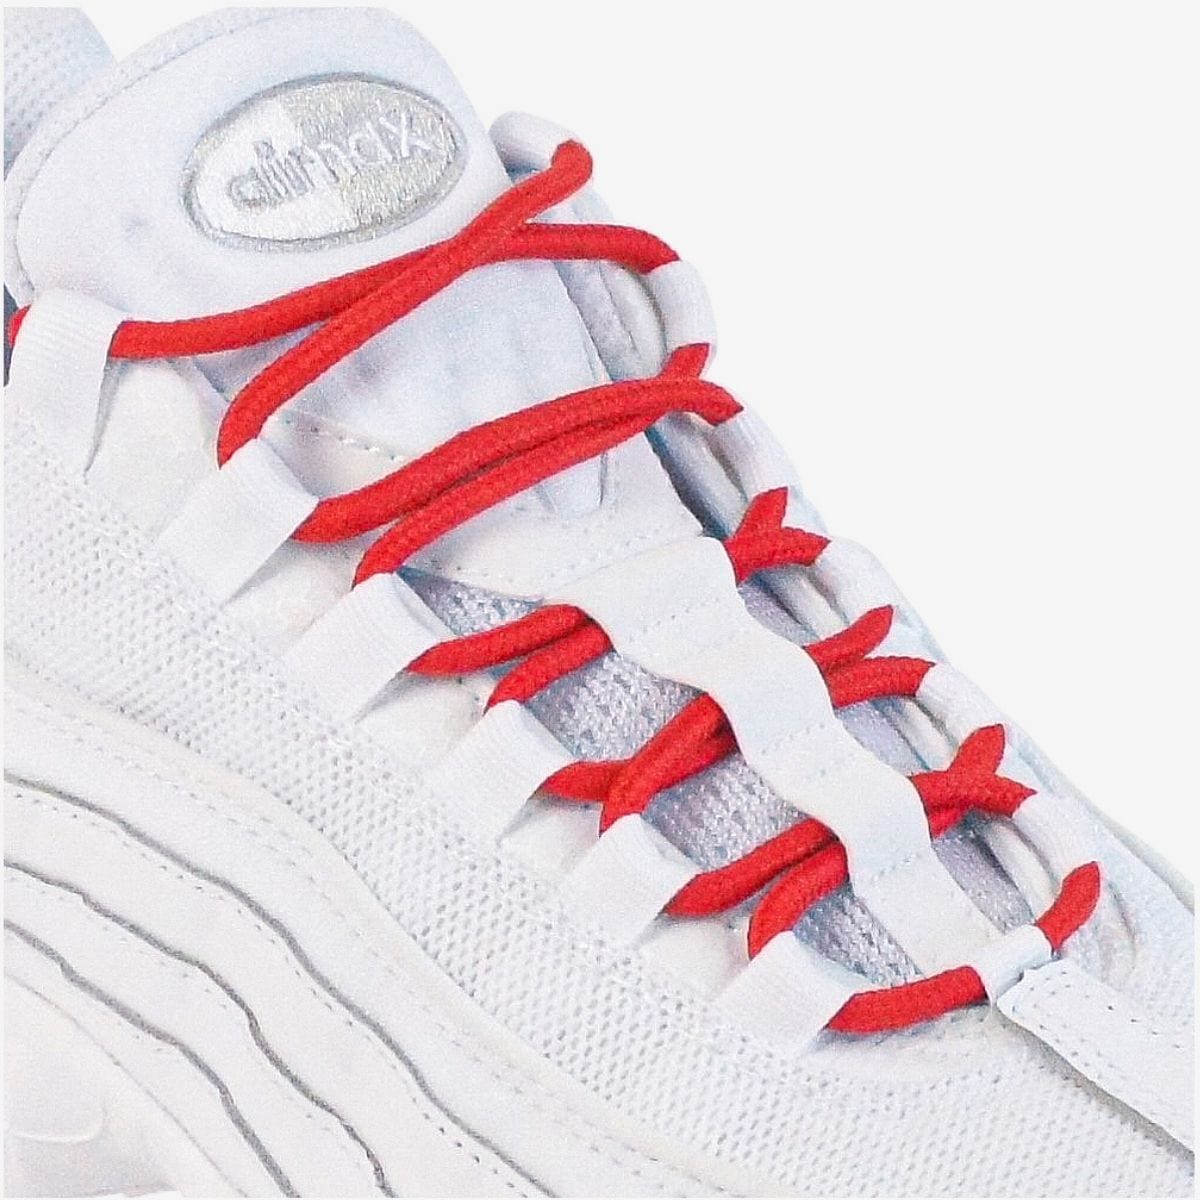 red-round-rope-shoelaces-for-sneakers-and-running-shoes